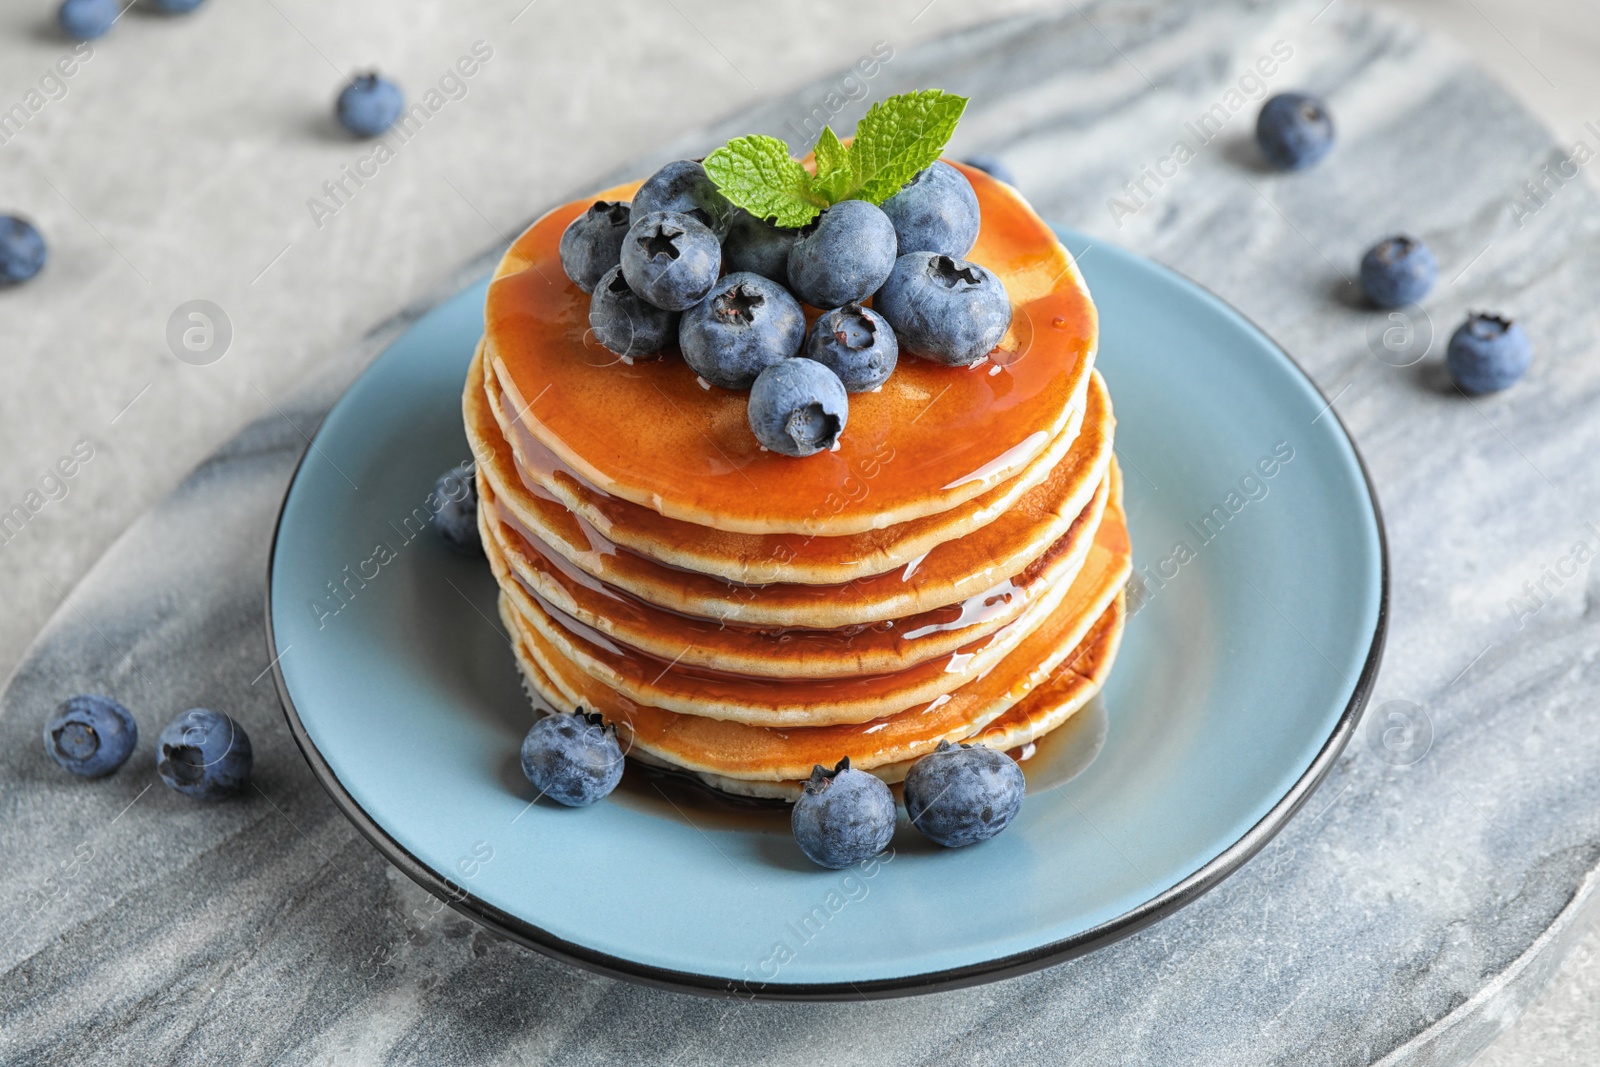 Photo of Plate of delicious pancakes with fresh blueberries and syrup on grey table